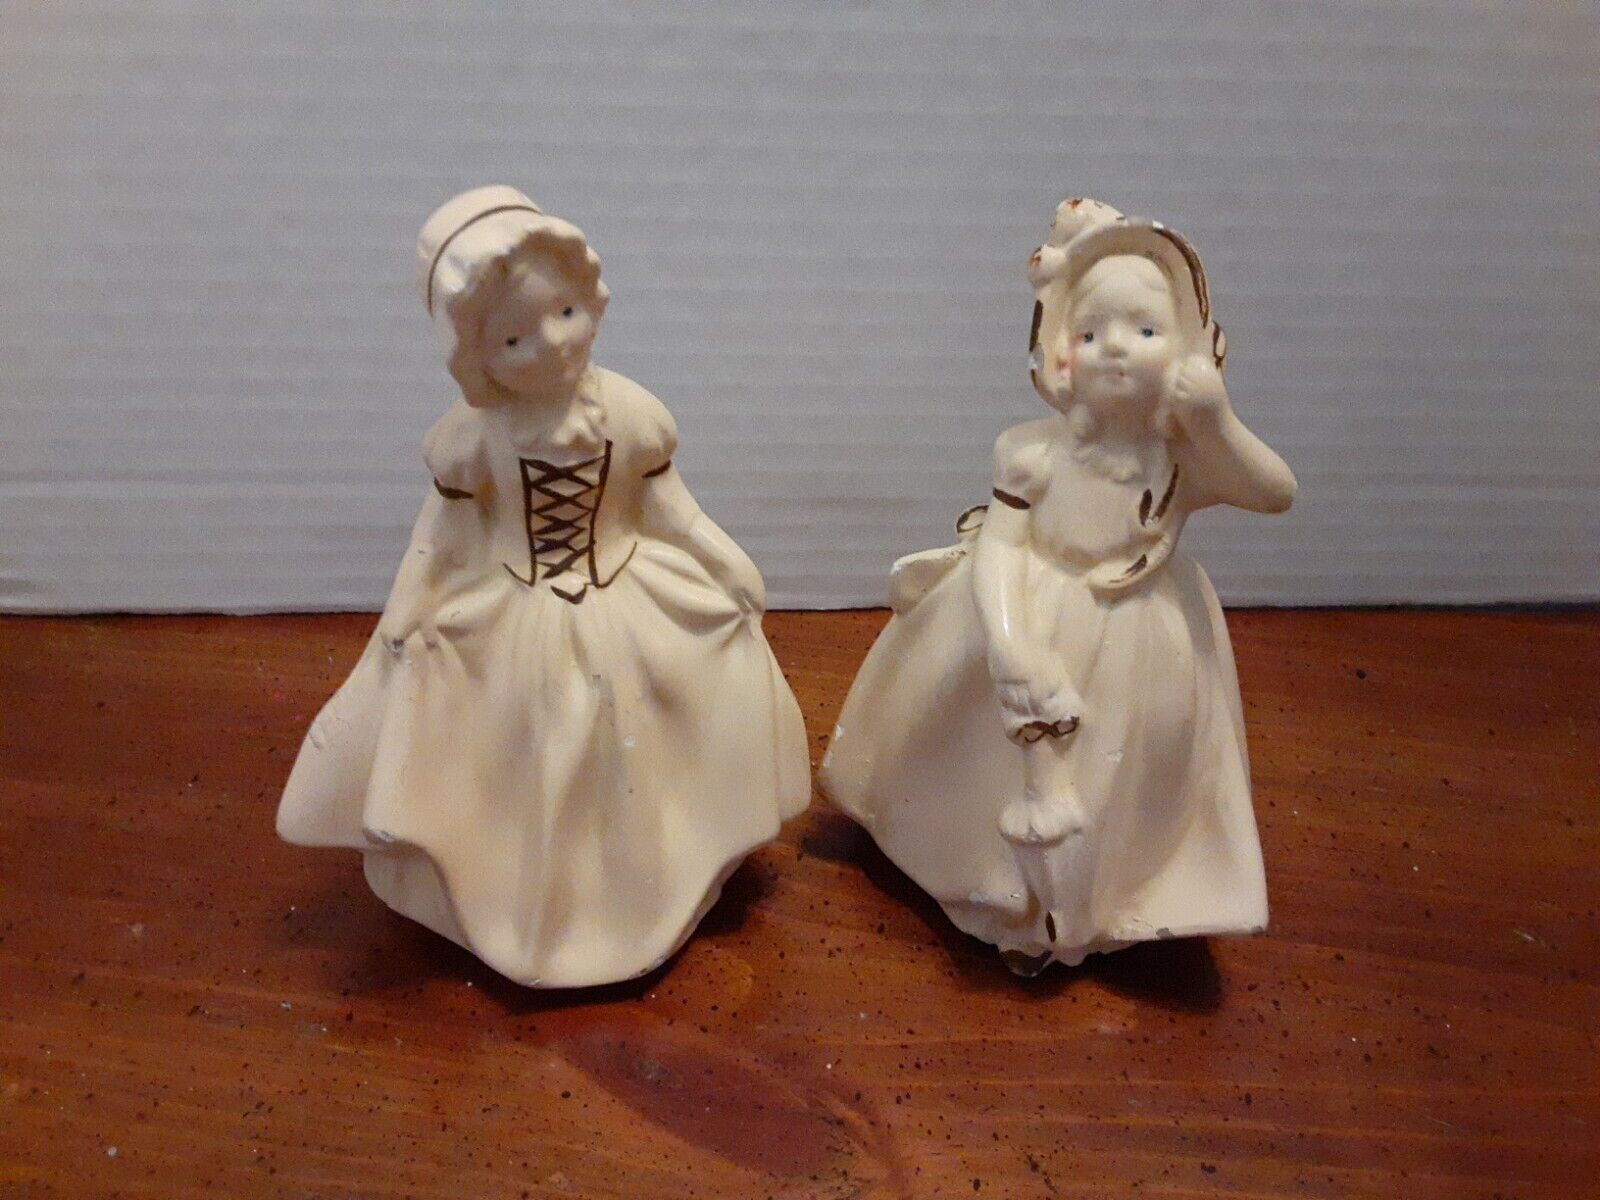 Coventry Ware Vintage 1940’s Chalkware Figurines Two Girls Cream Color